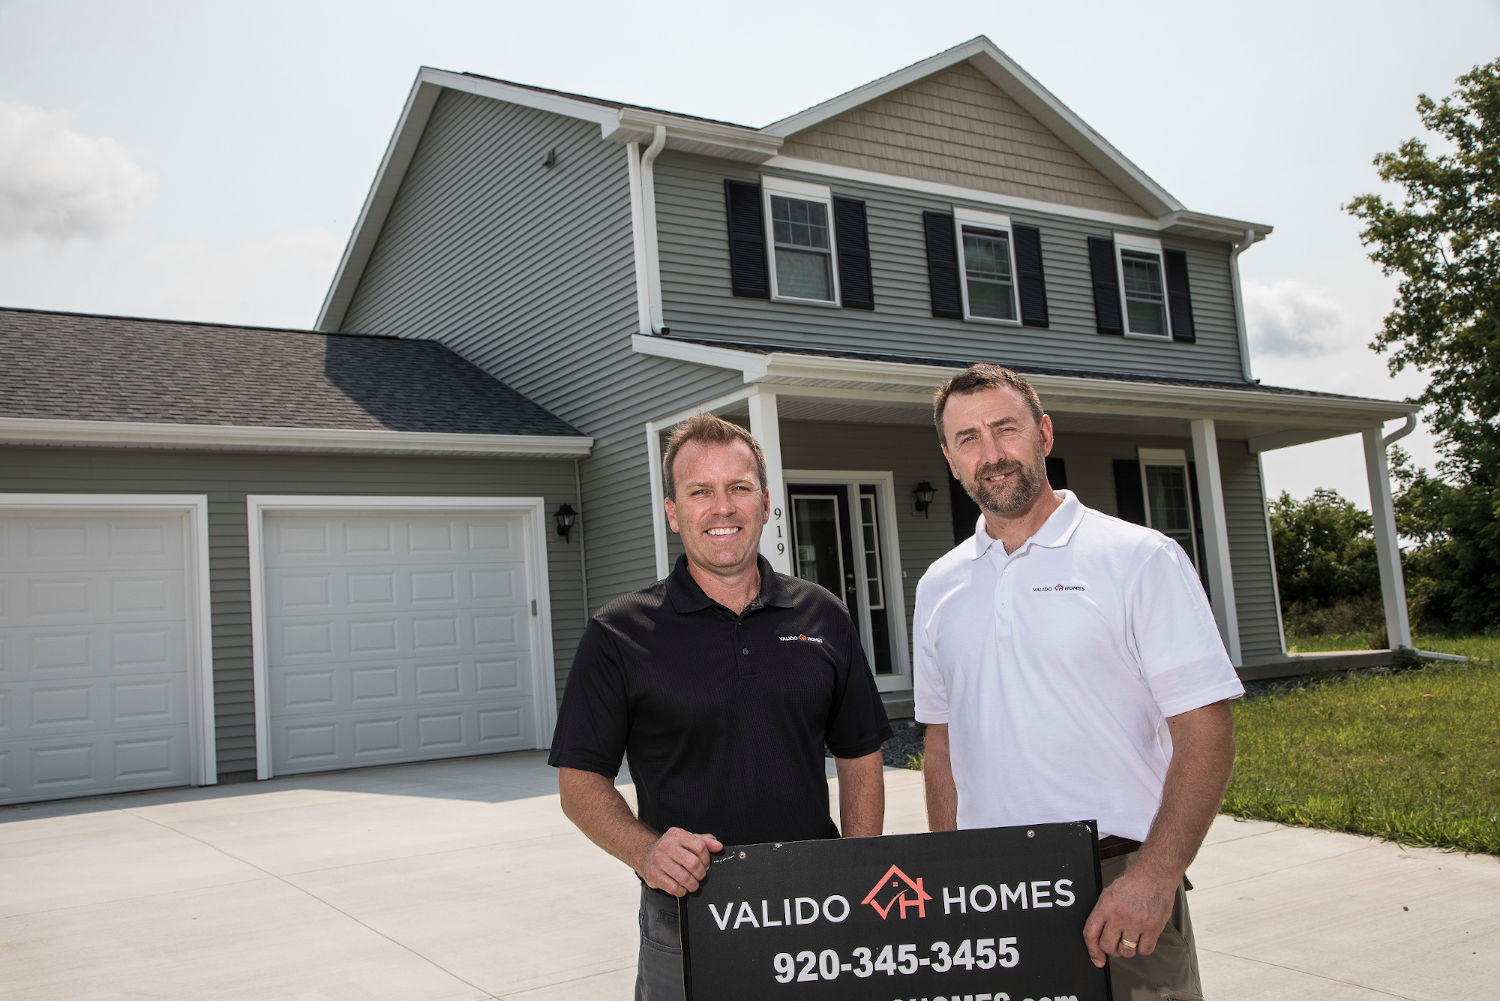 Jim and Steve Selling a Valido Home!